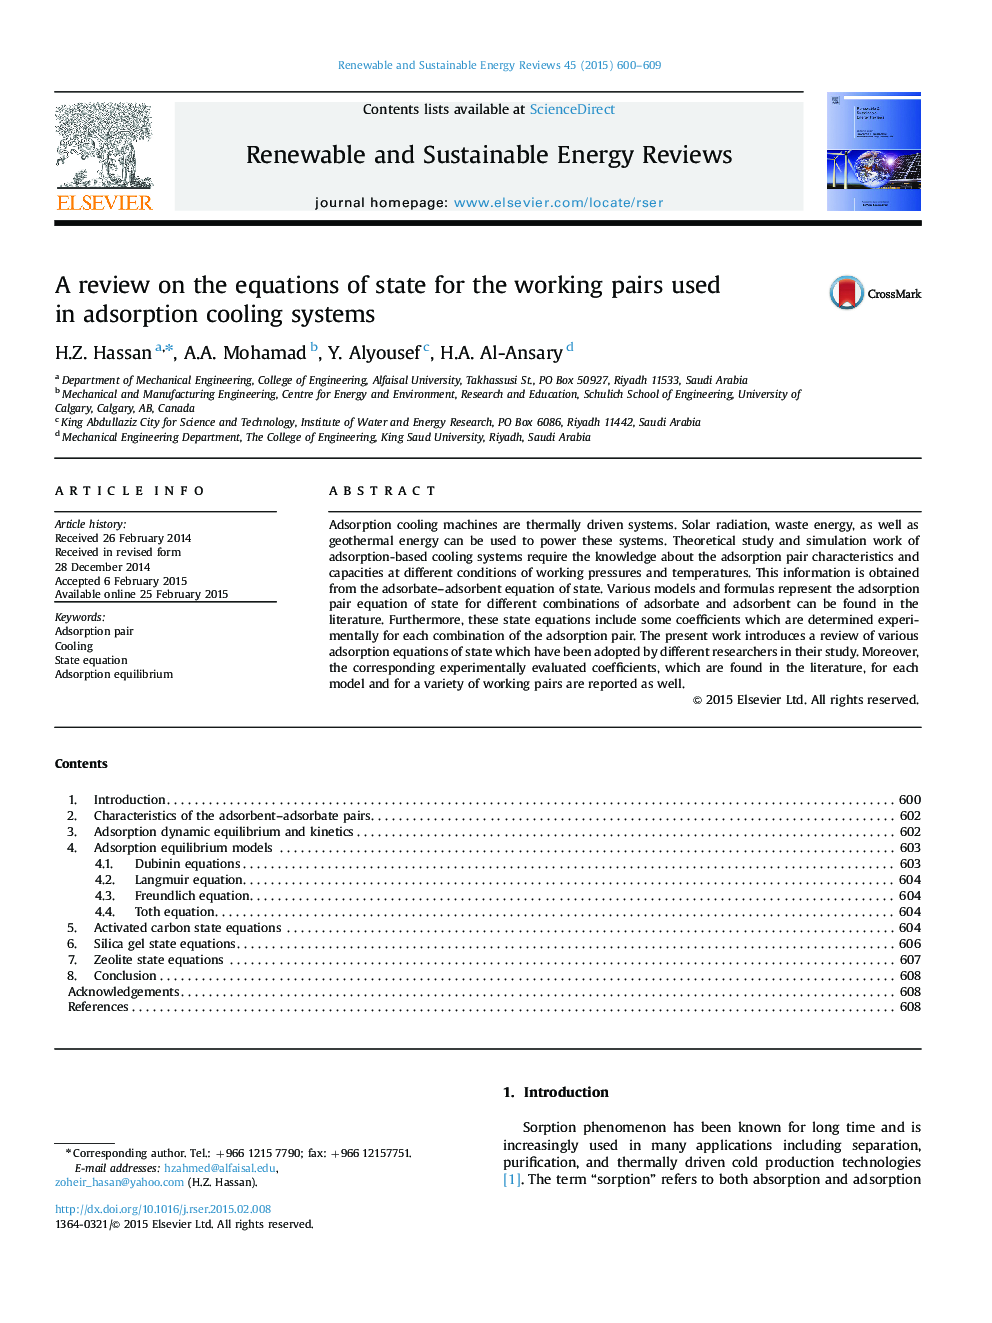 A review on the equations of state for the working pairs used in adsorption cooling systems